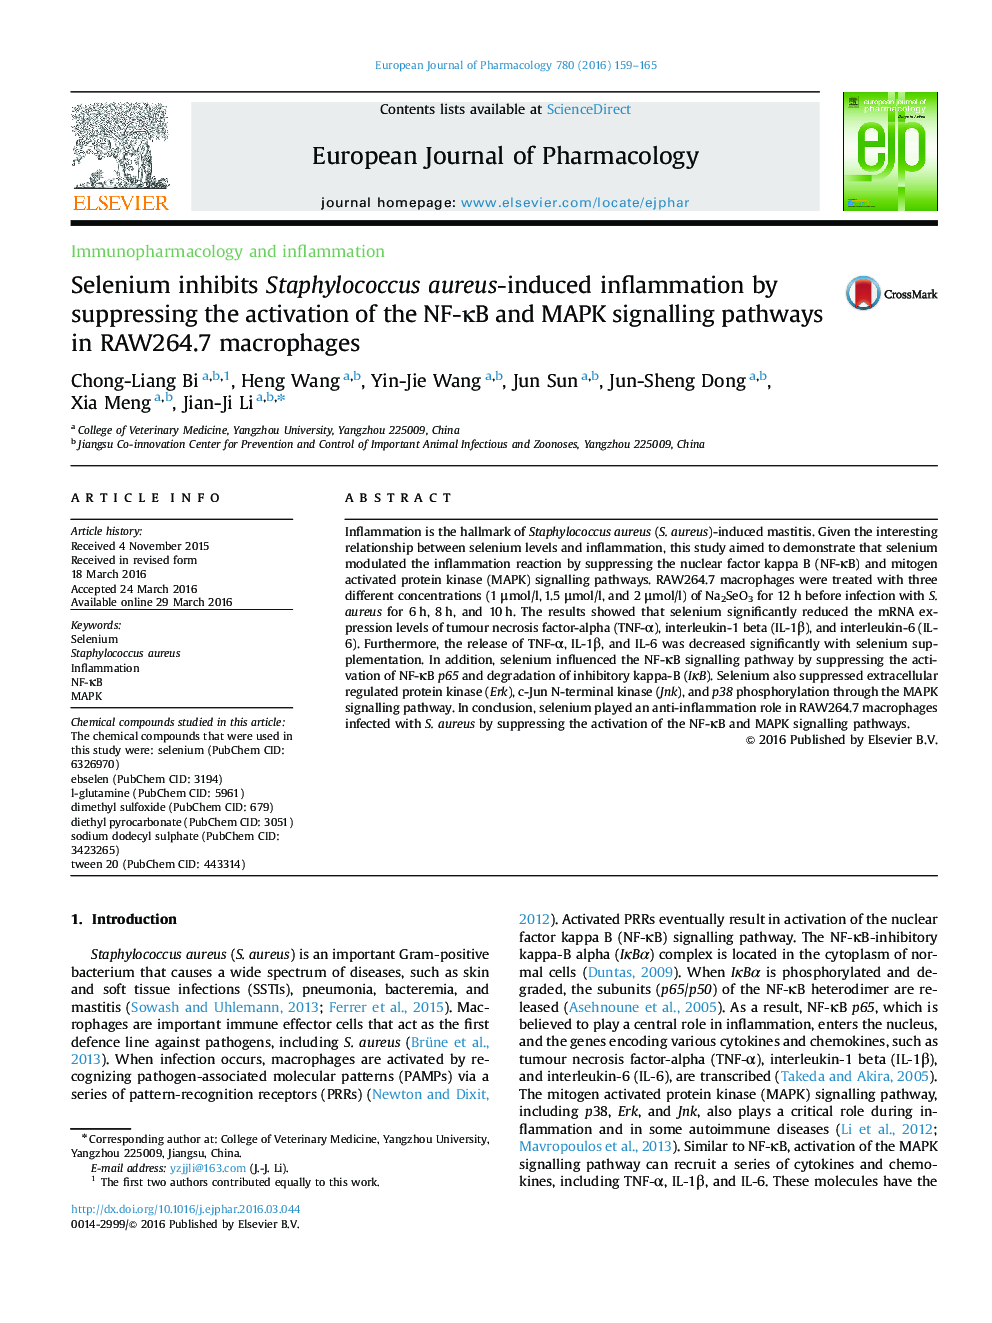 Selenium inhibits Staphylococcus aureus-induced inflammation by suppressing the activation of the NF-κB and MAPK signalling pathways in RAW264.7 macrophages